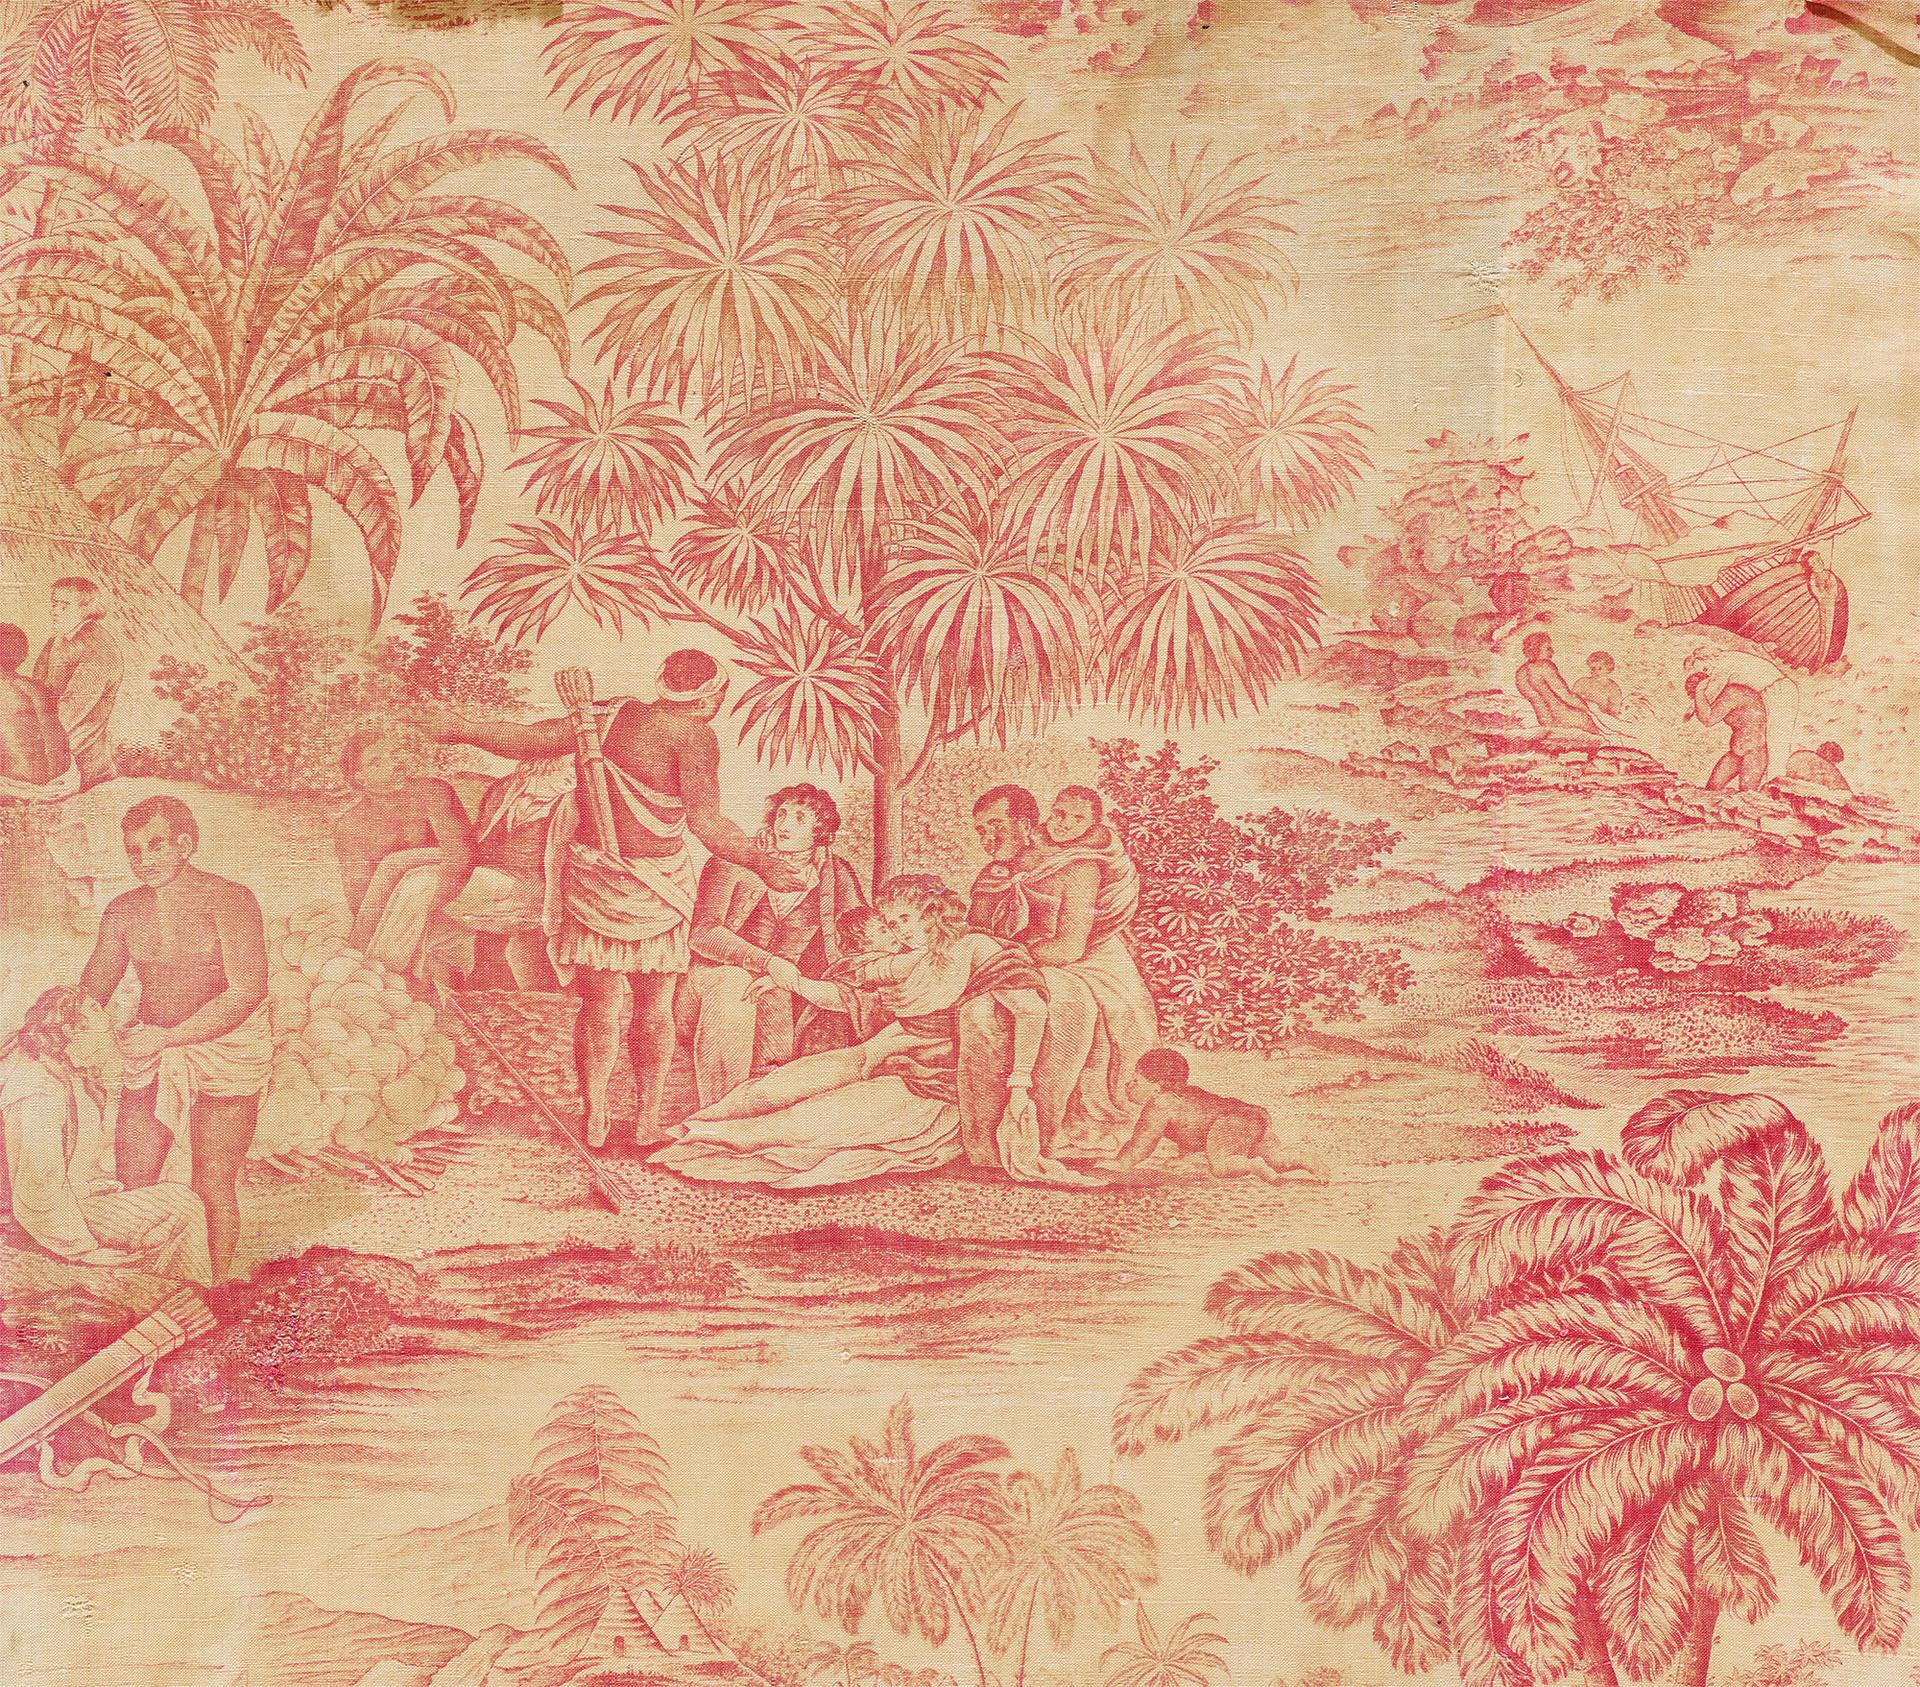 Detail of "Abolitionist Furnishing Textile", early 1800s